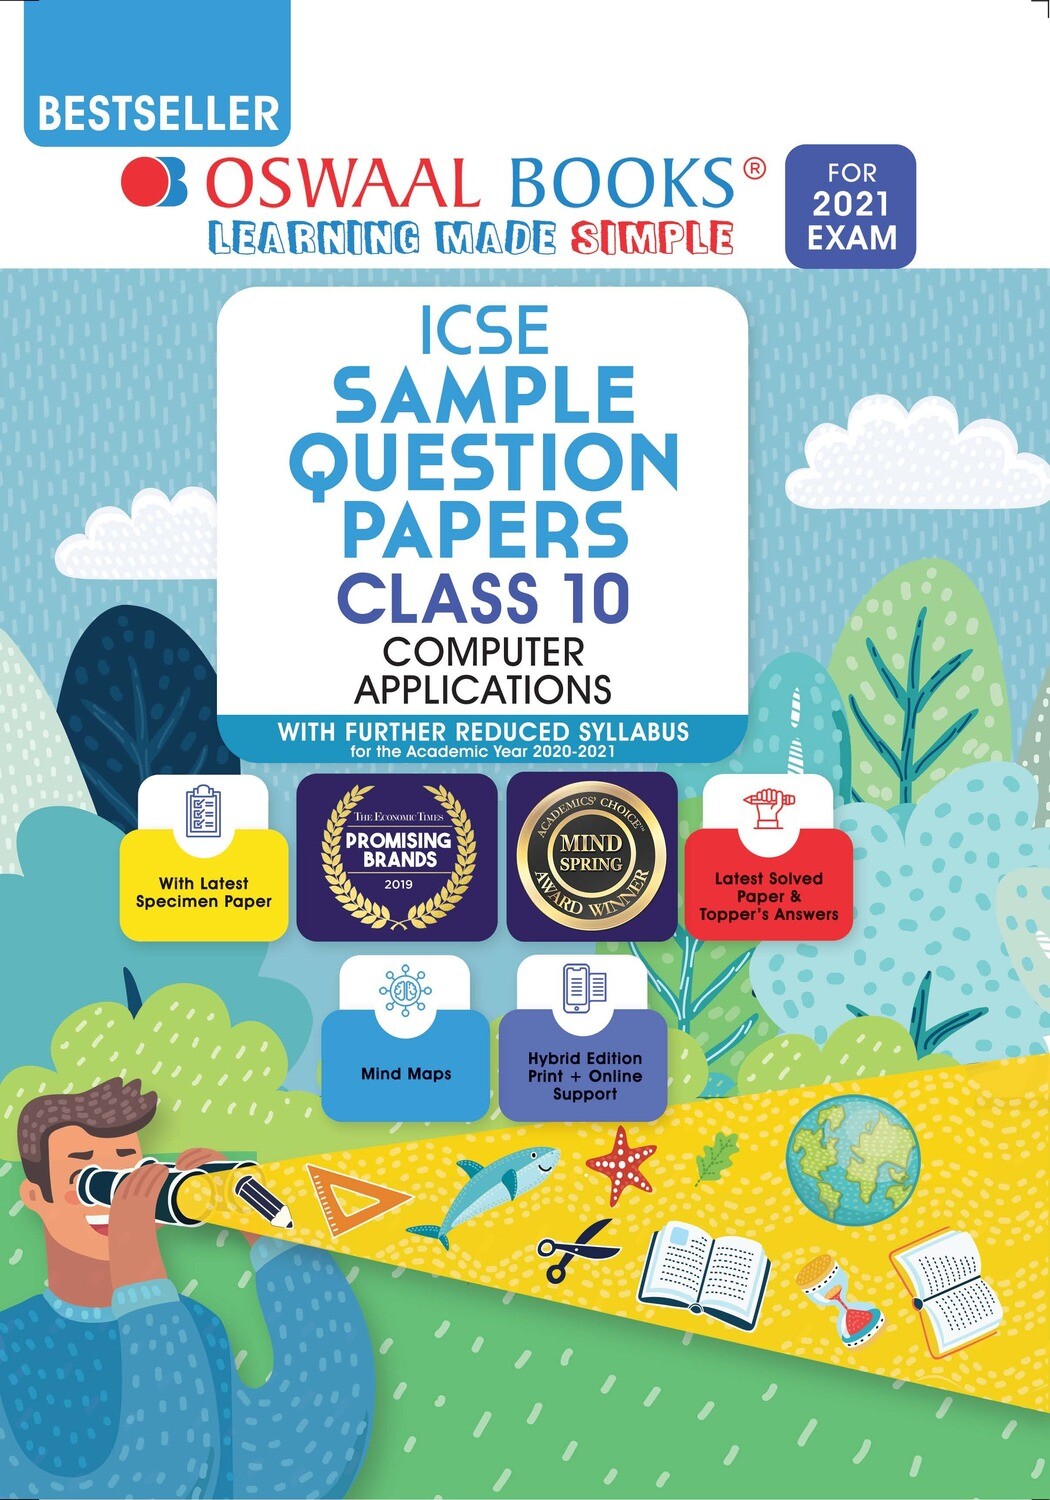 Buy e-book: Oswaal ICSE Sample Question Papers Class 10 Computer Applications (Reduced Syllabus for 2021 Exam)